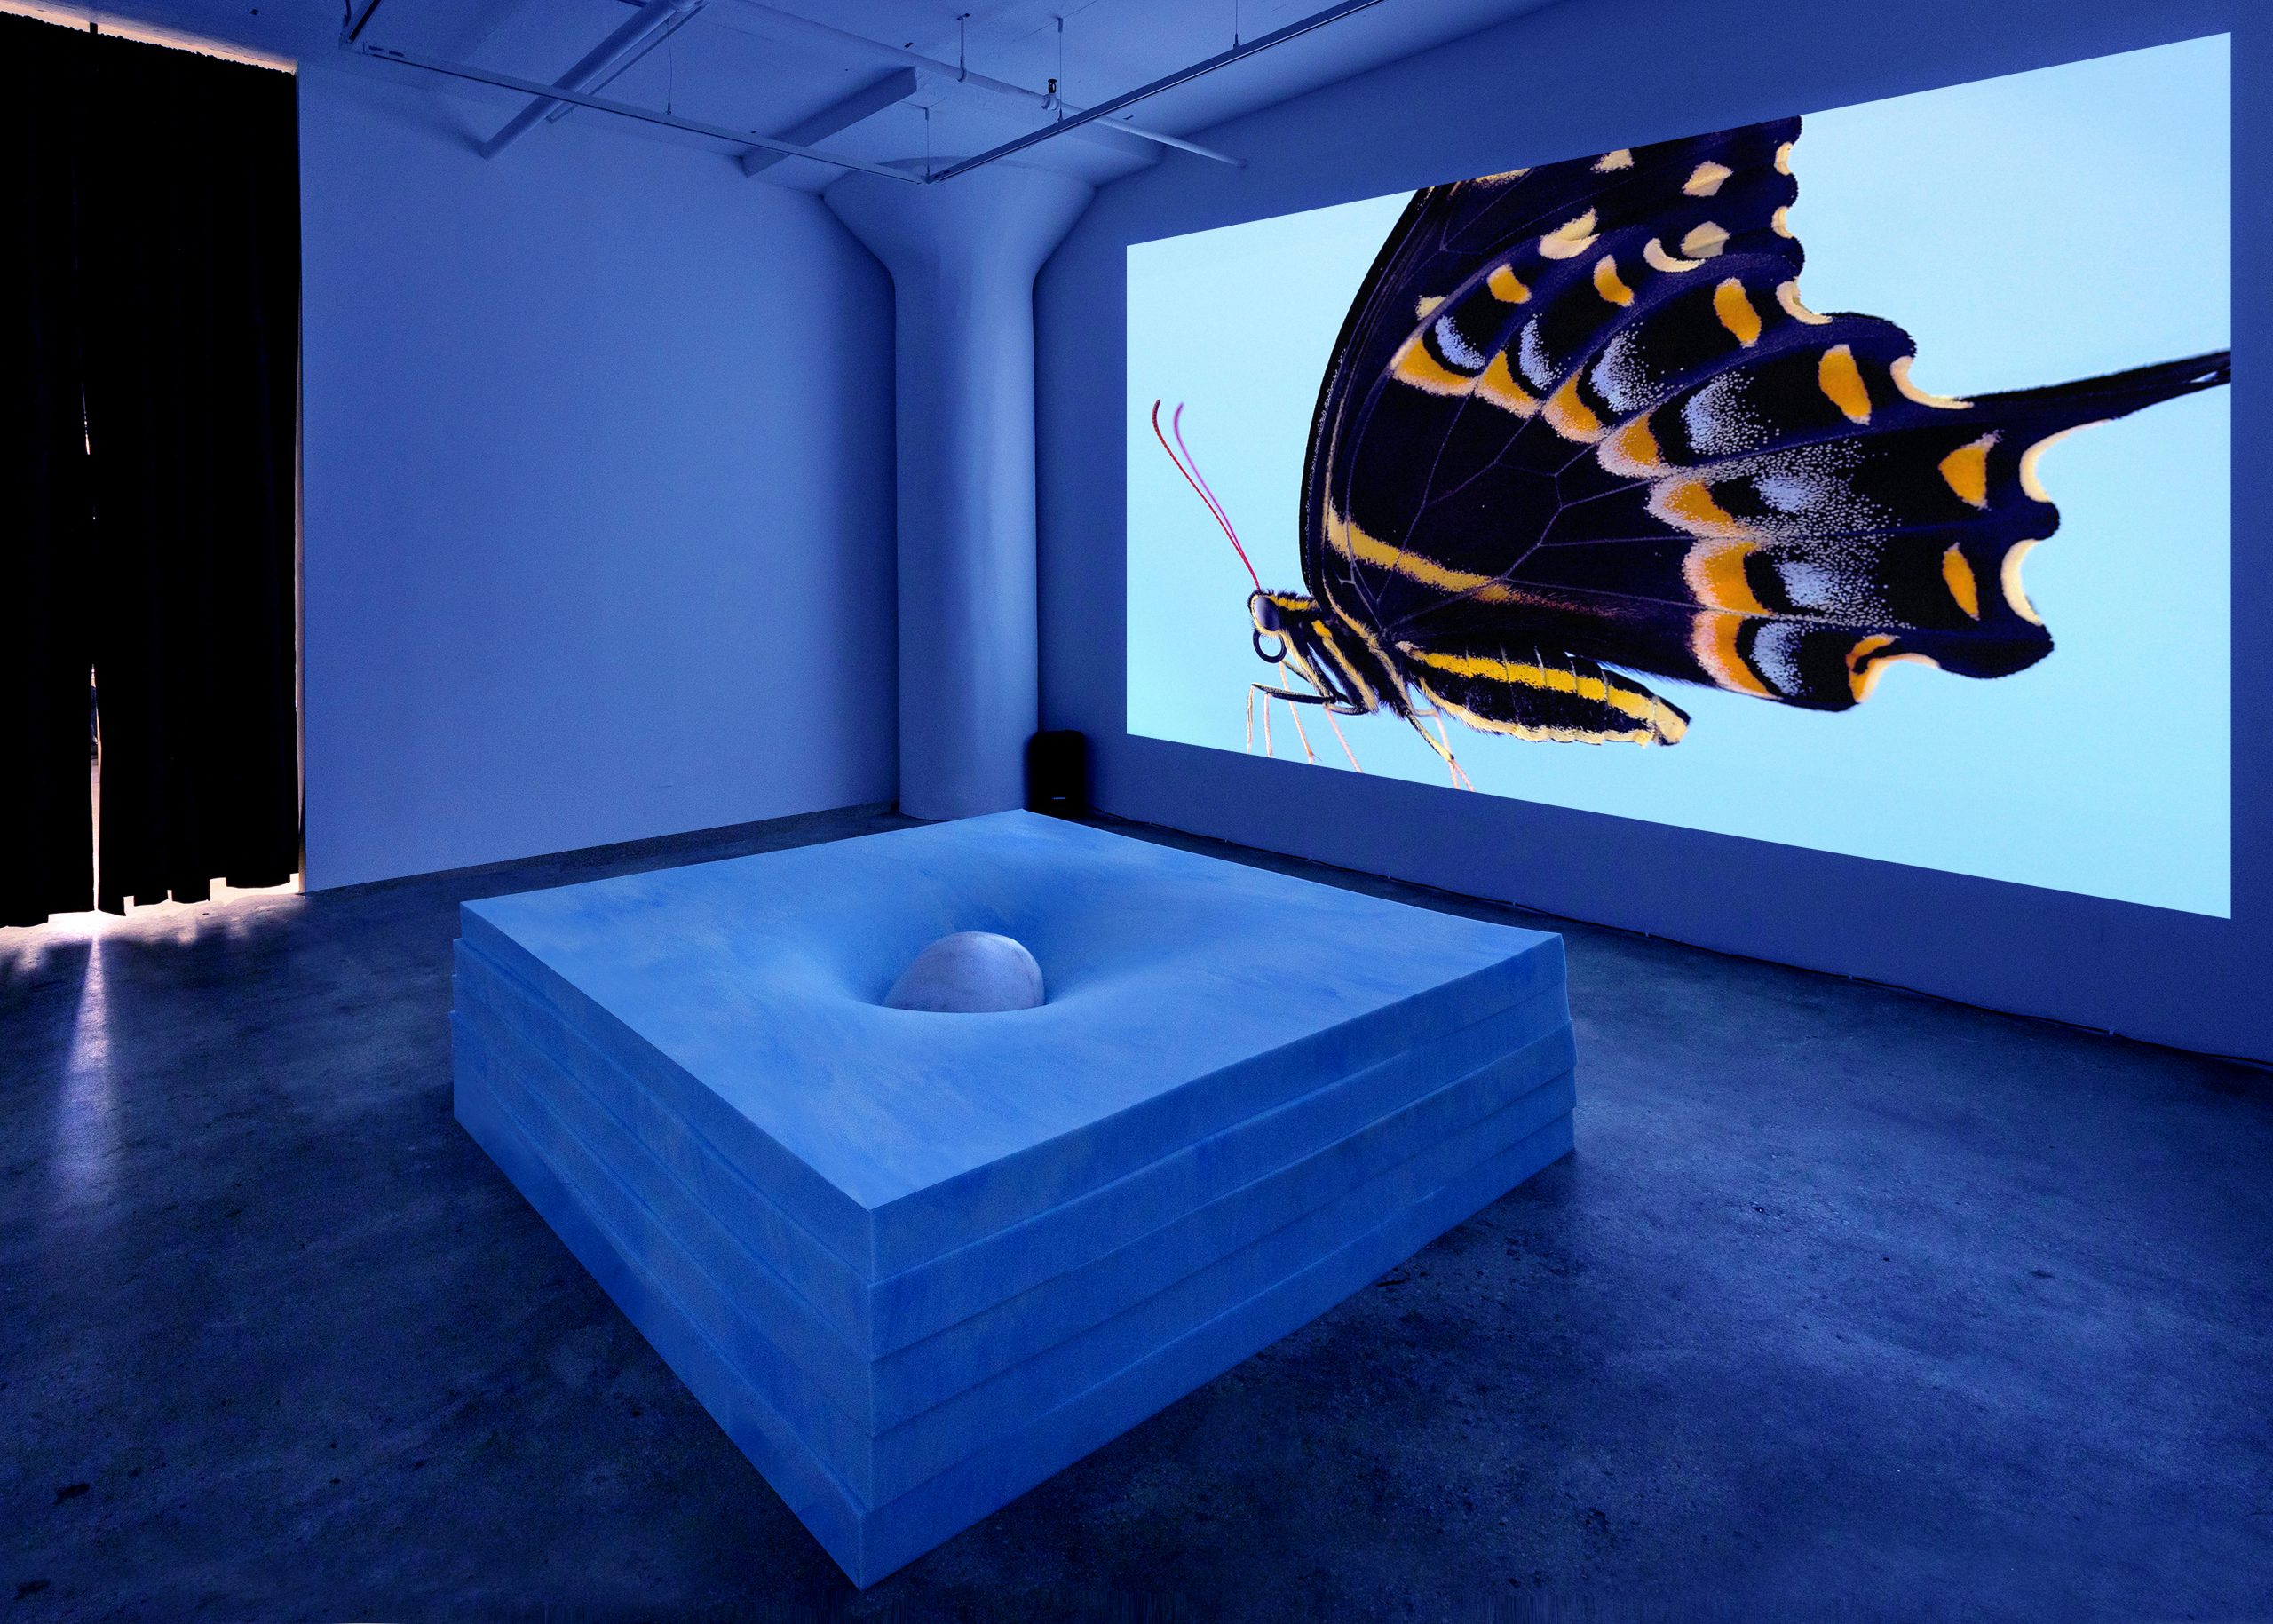 An installation view of a large projected image of a butterfly on the wall, in front of an abstract work.